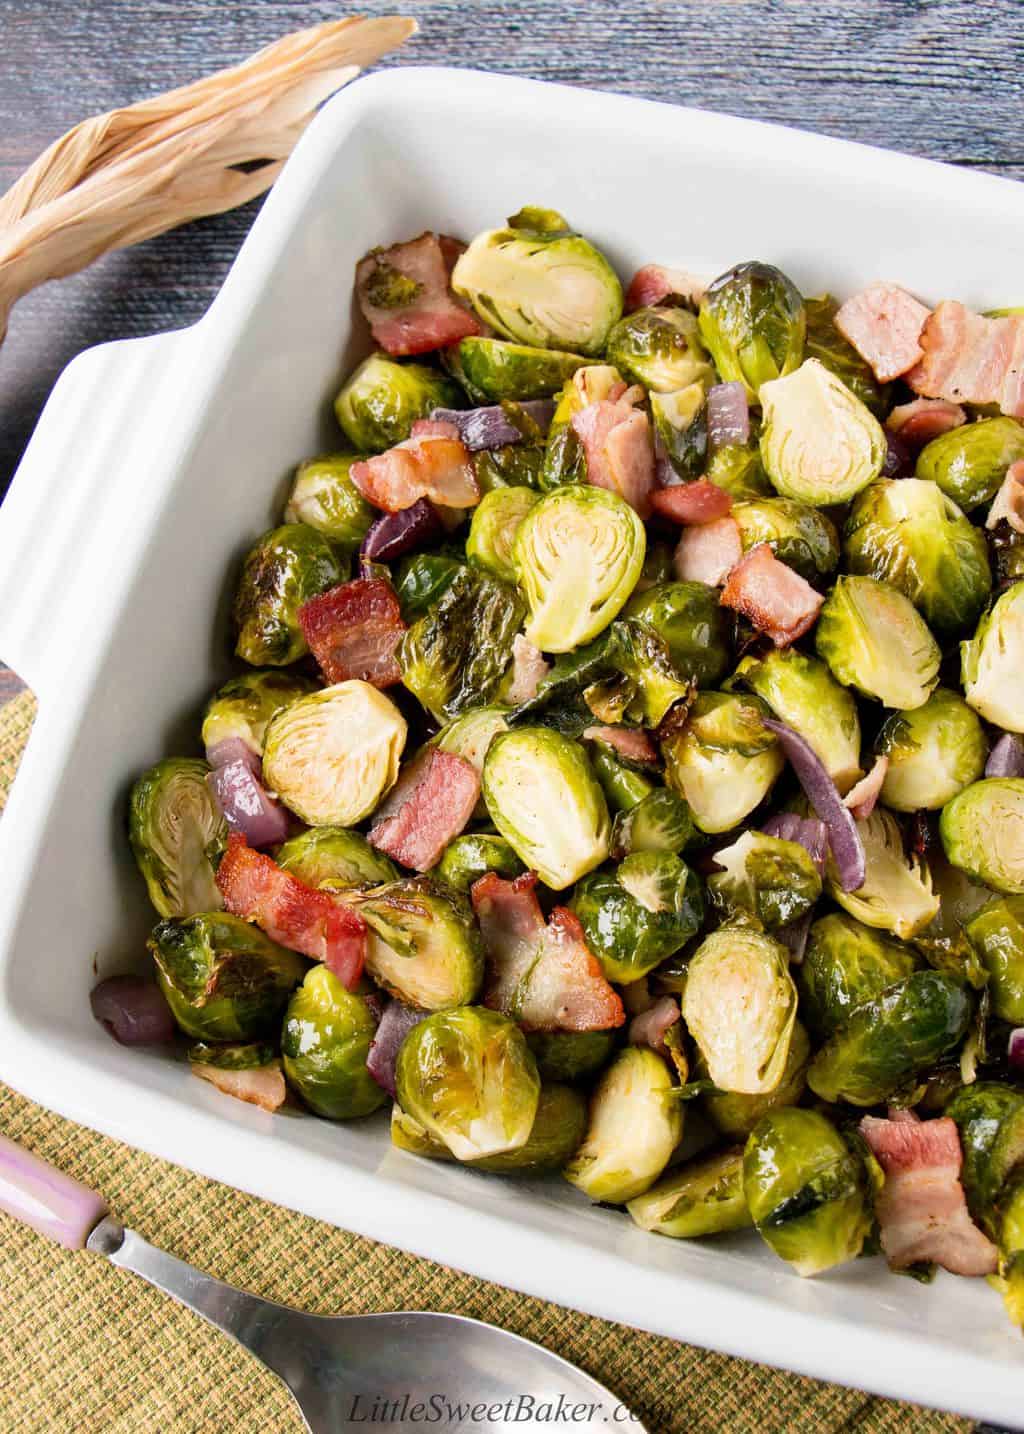 This easy one-pan roasted brussel sprouts is a perfect side dish to any meal. The bacon adds a smokey flavor to the crispy and sweet caramelized brussel sprouts. #roastedbrusselsprouts #Thanksgivingside #Thanksgivingrecipe